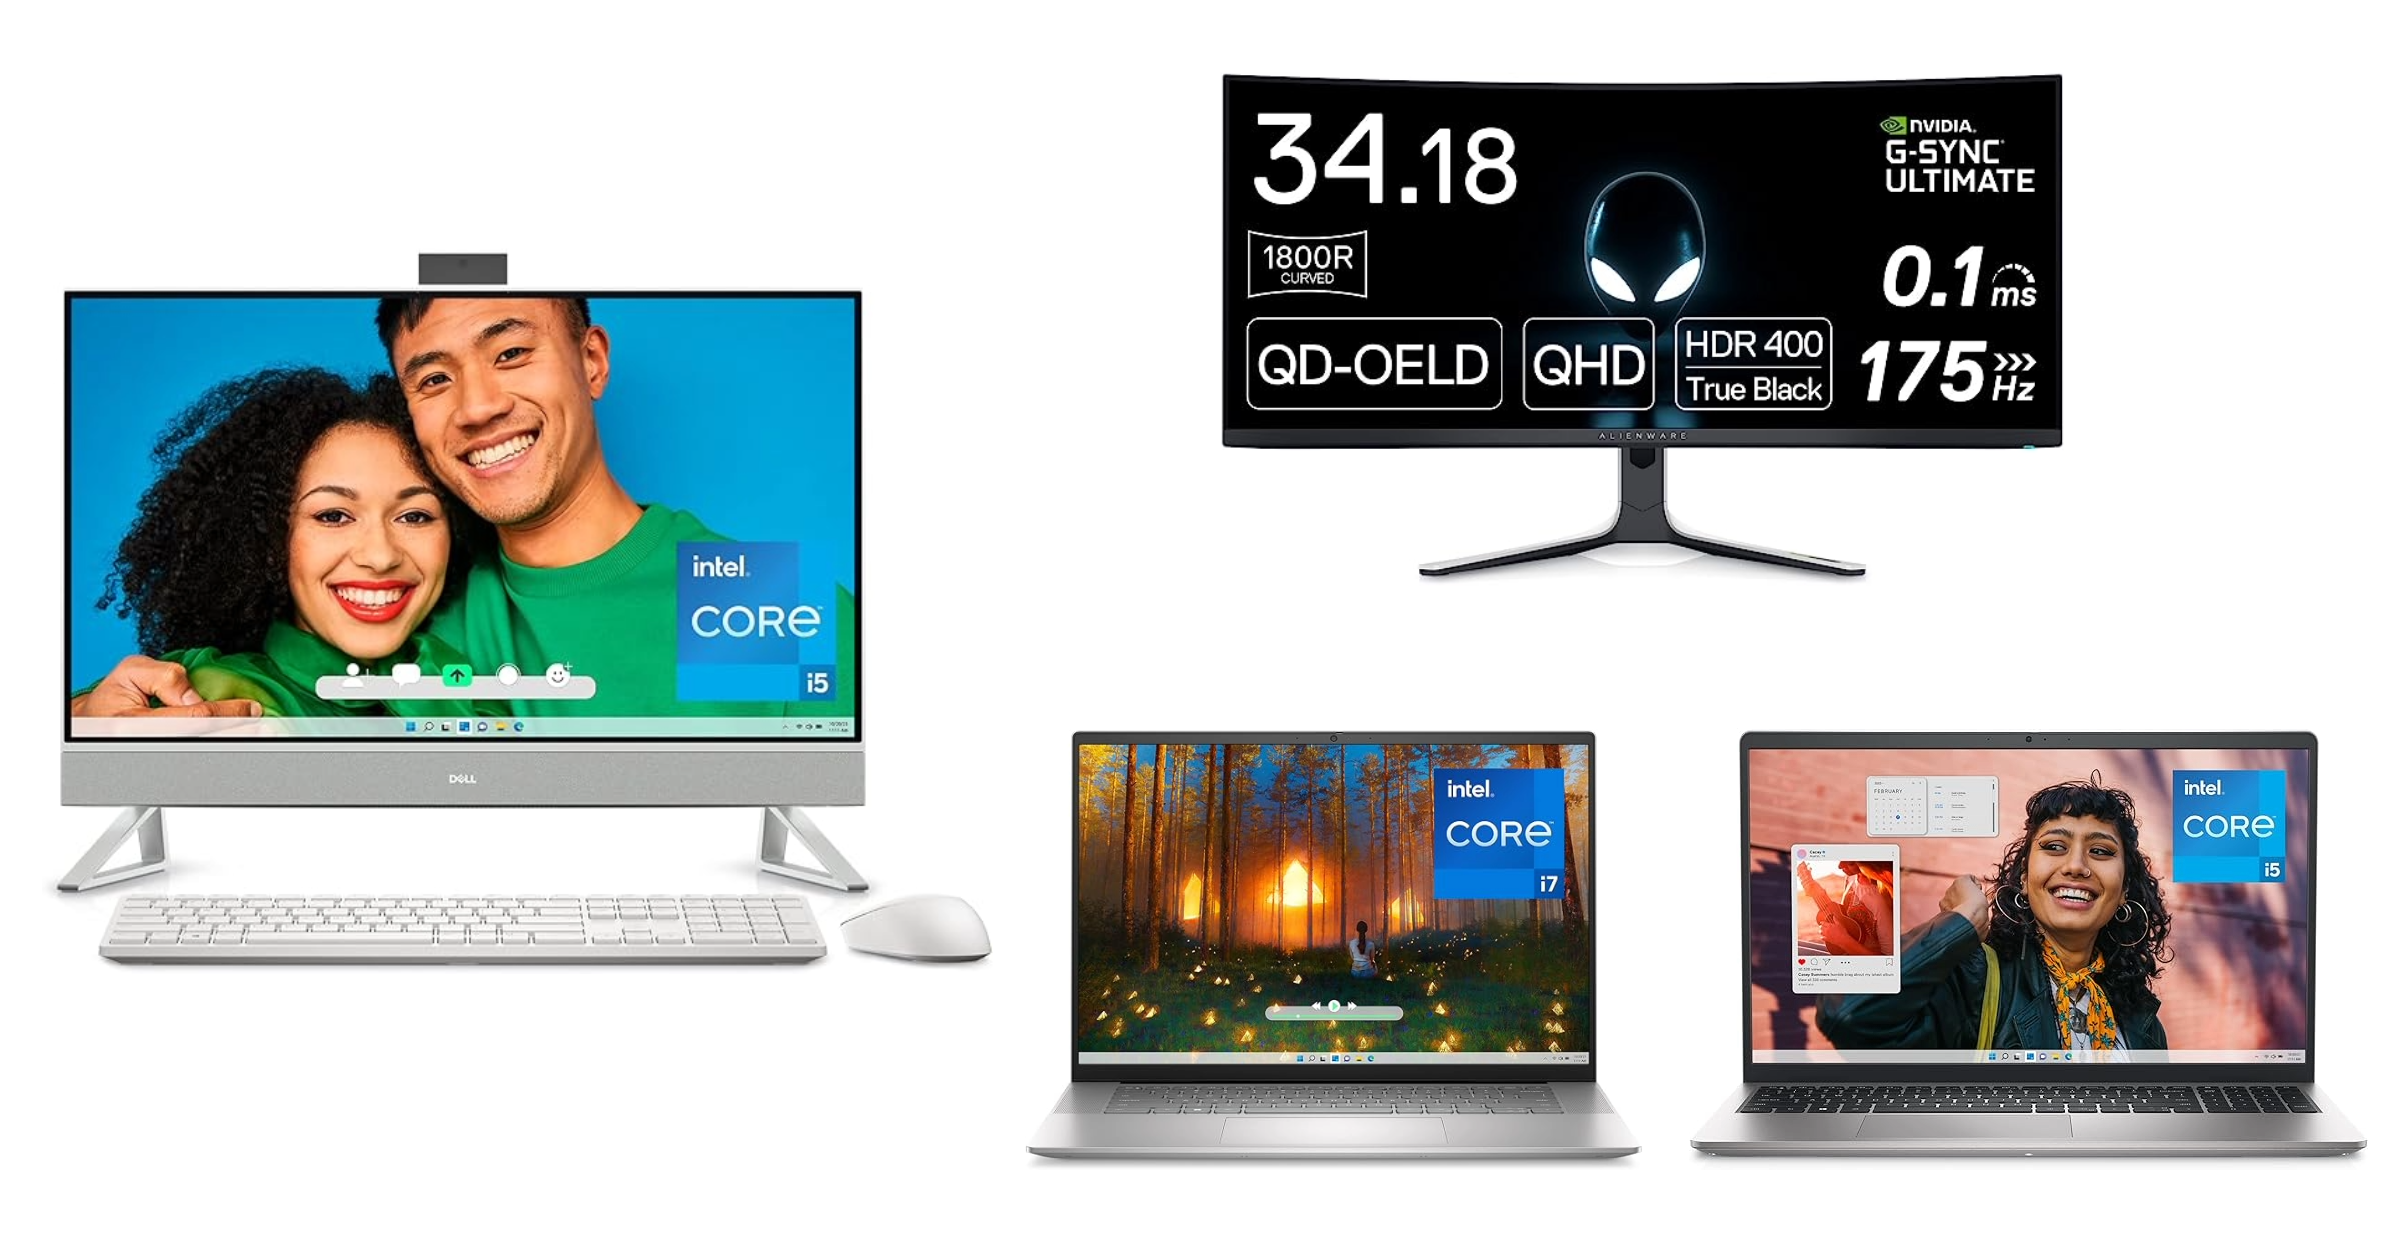 Dell Presidents' Day Sale on Amazon 